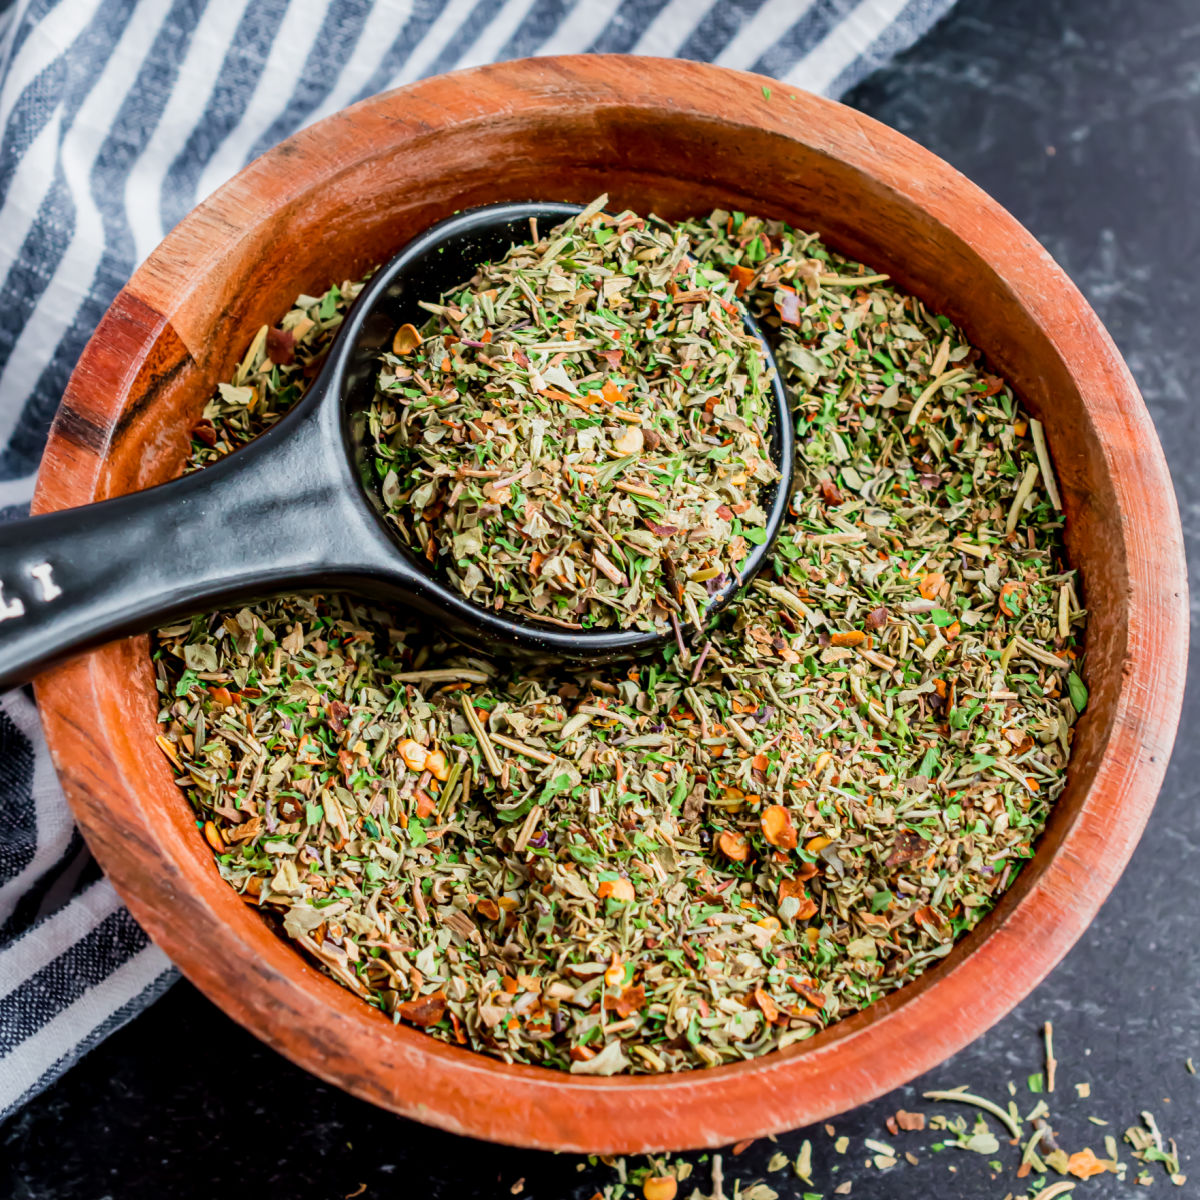 This Homemade Italian Seasoning mix adds instant herby flavor to any dish. Mix together this easy spice recipe to use in all of your favorite Italian dishes.